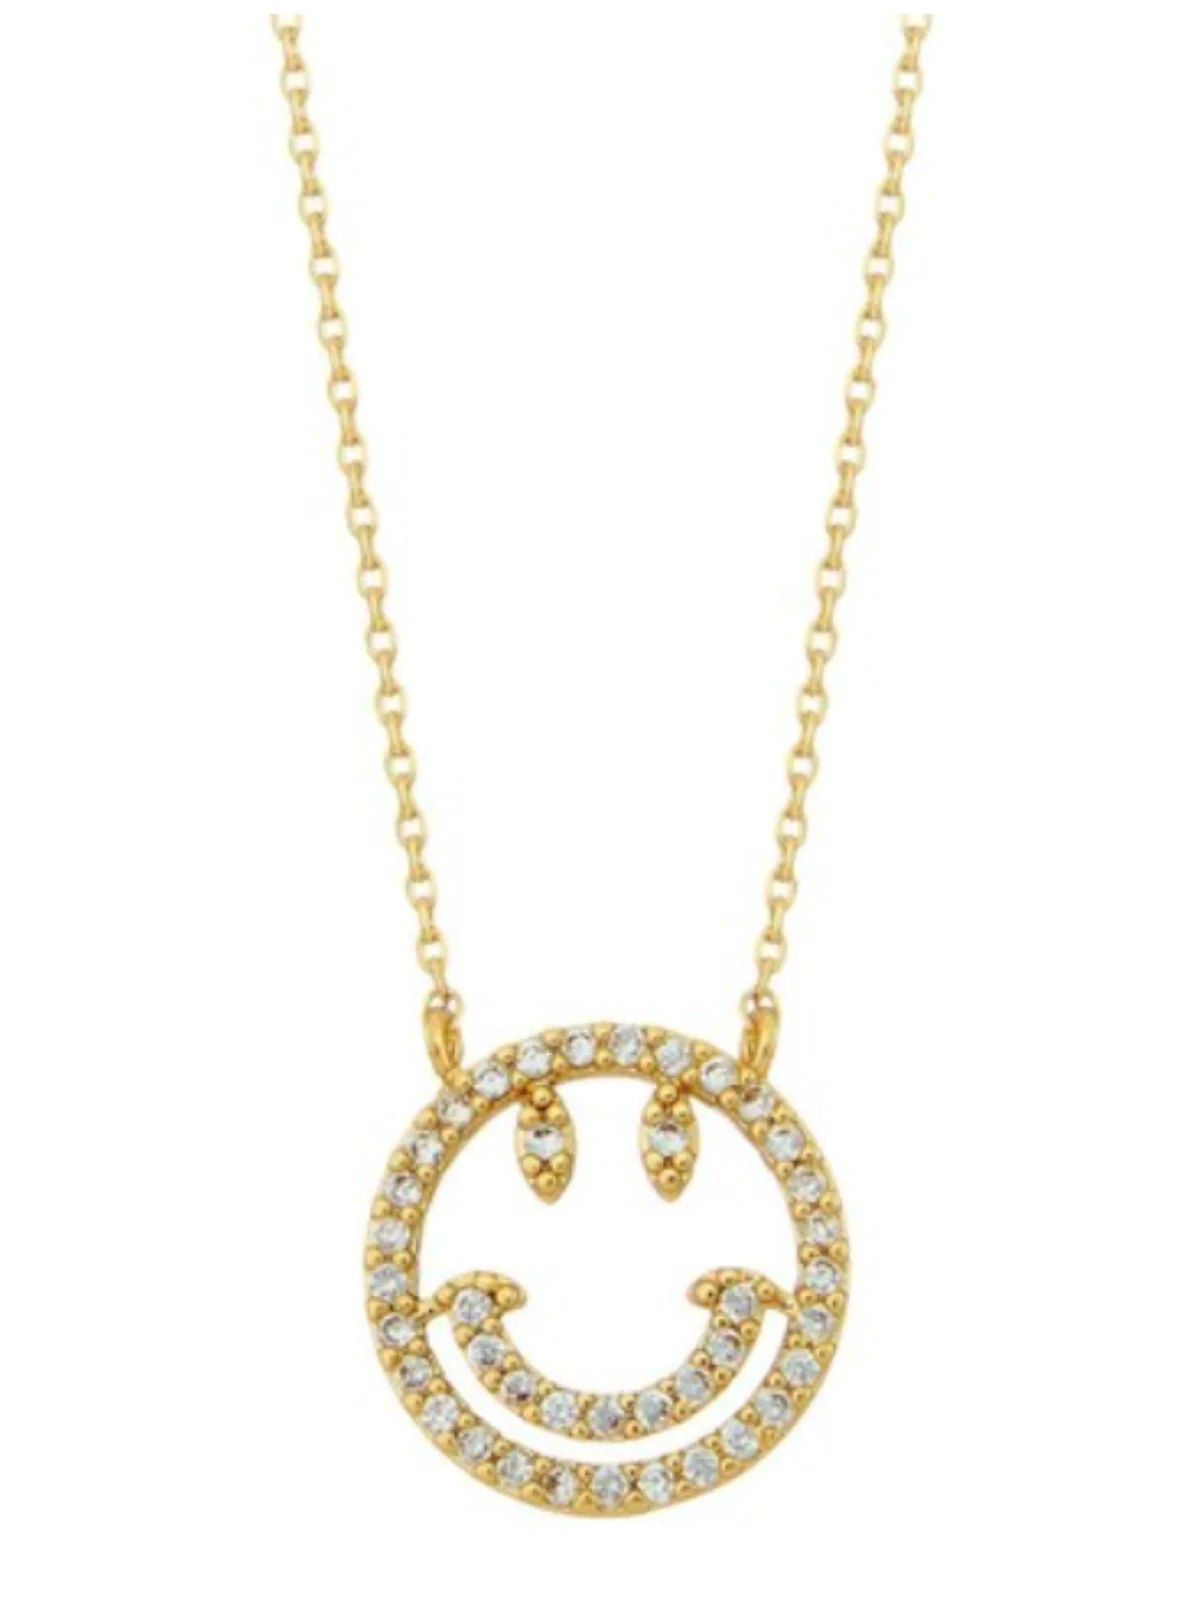 HAPPY DAYS NECKLACE | Judith March